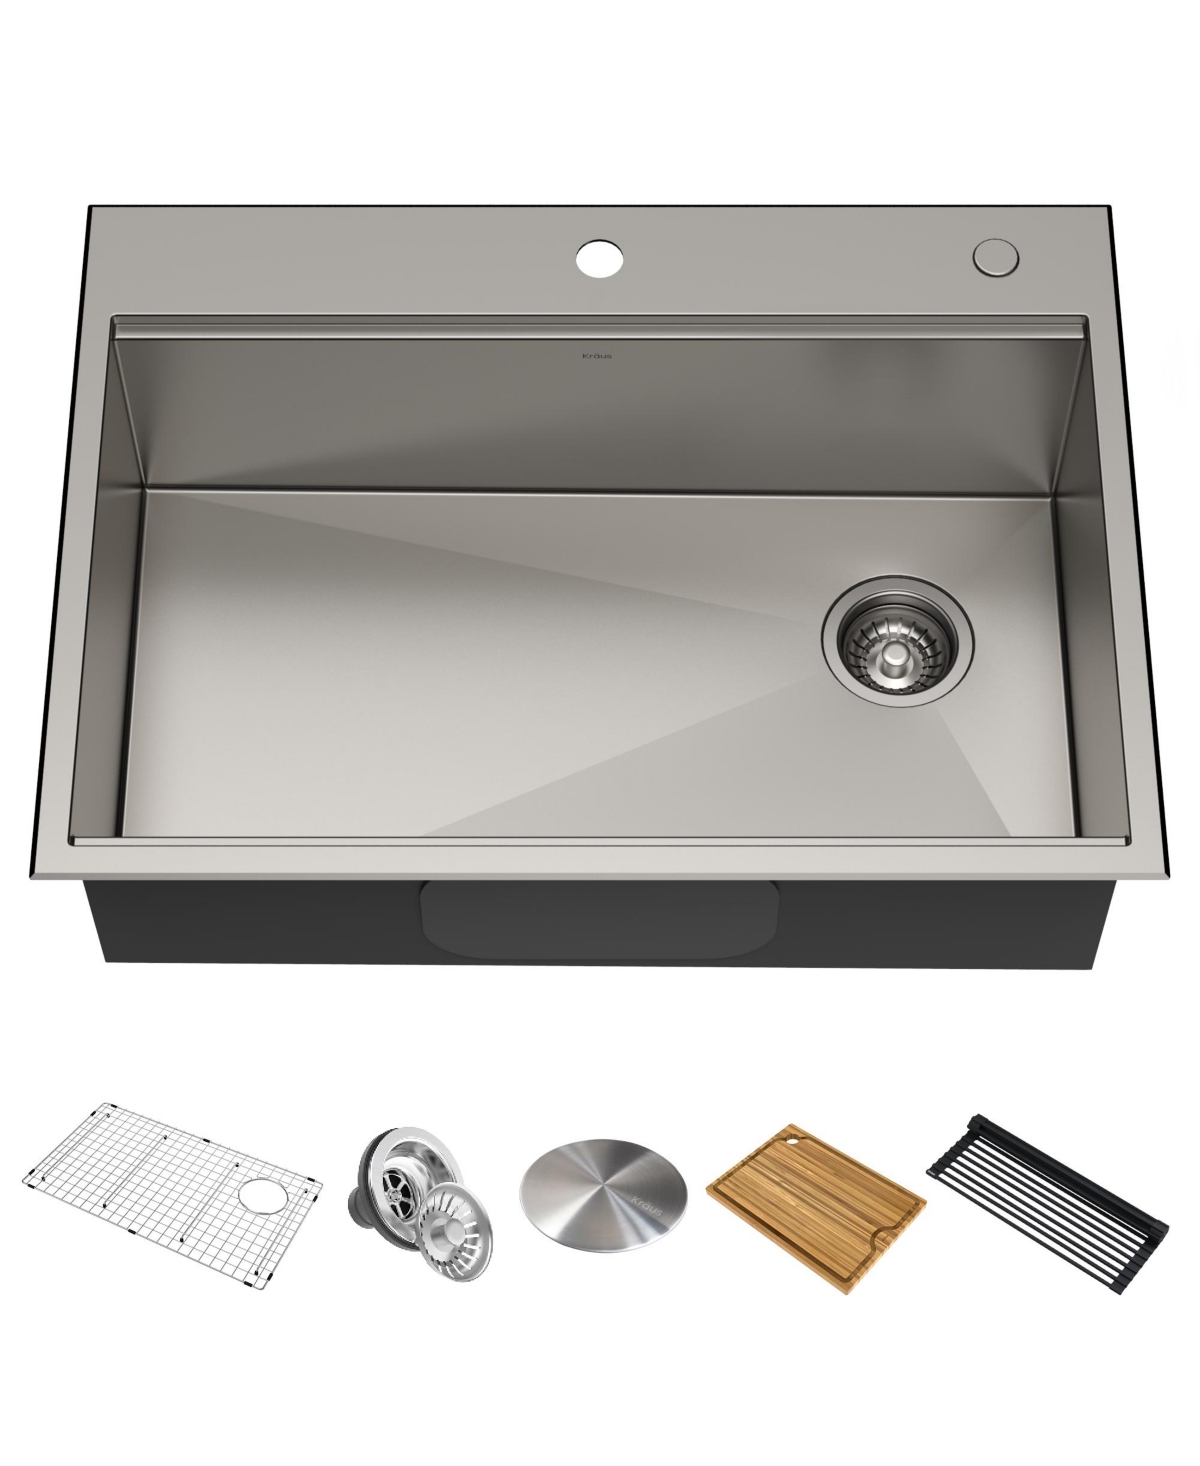 Kore 30 in. Workstation Drop-In 16 Gauge Single Bowl Stainless Steel Kitchen Sink with Accessories - Stainless steel